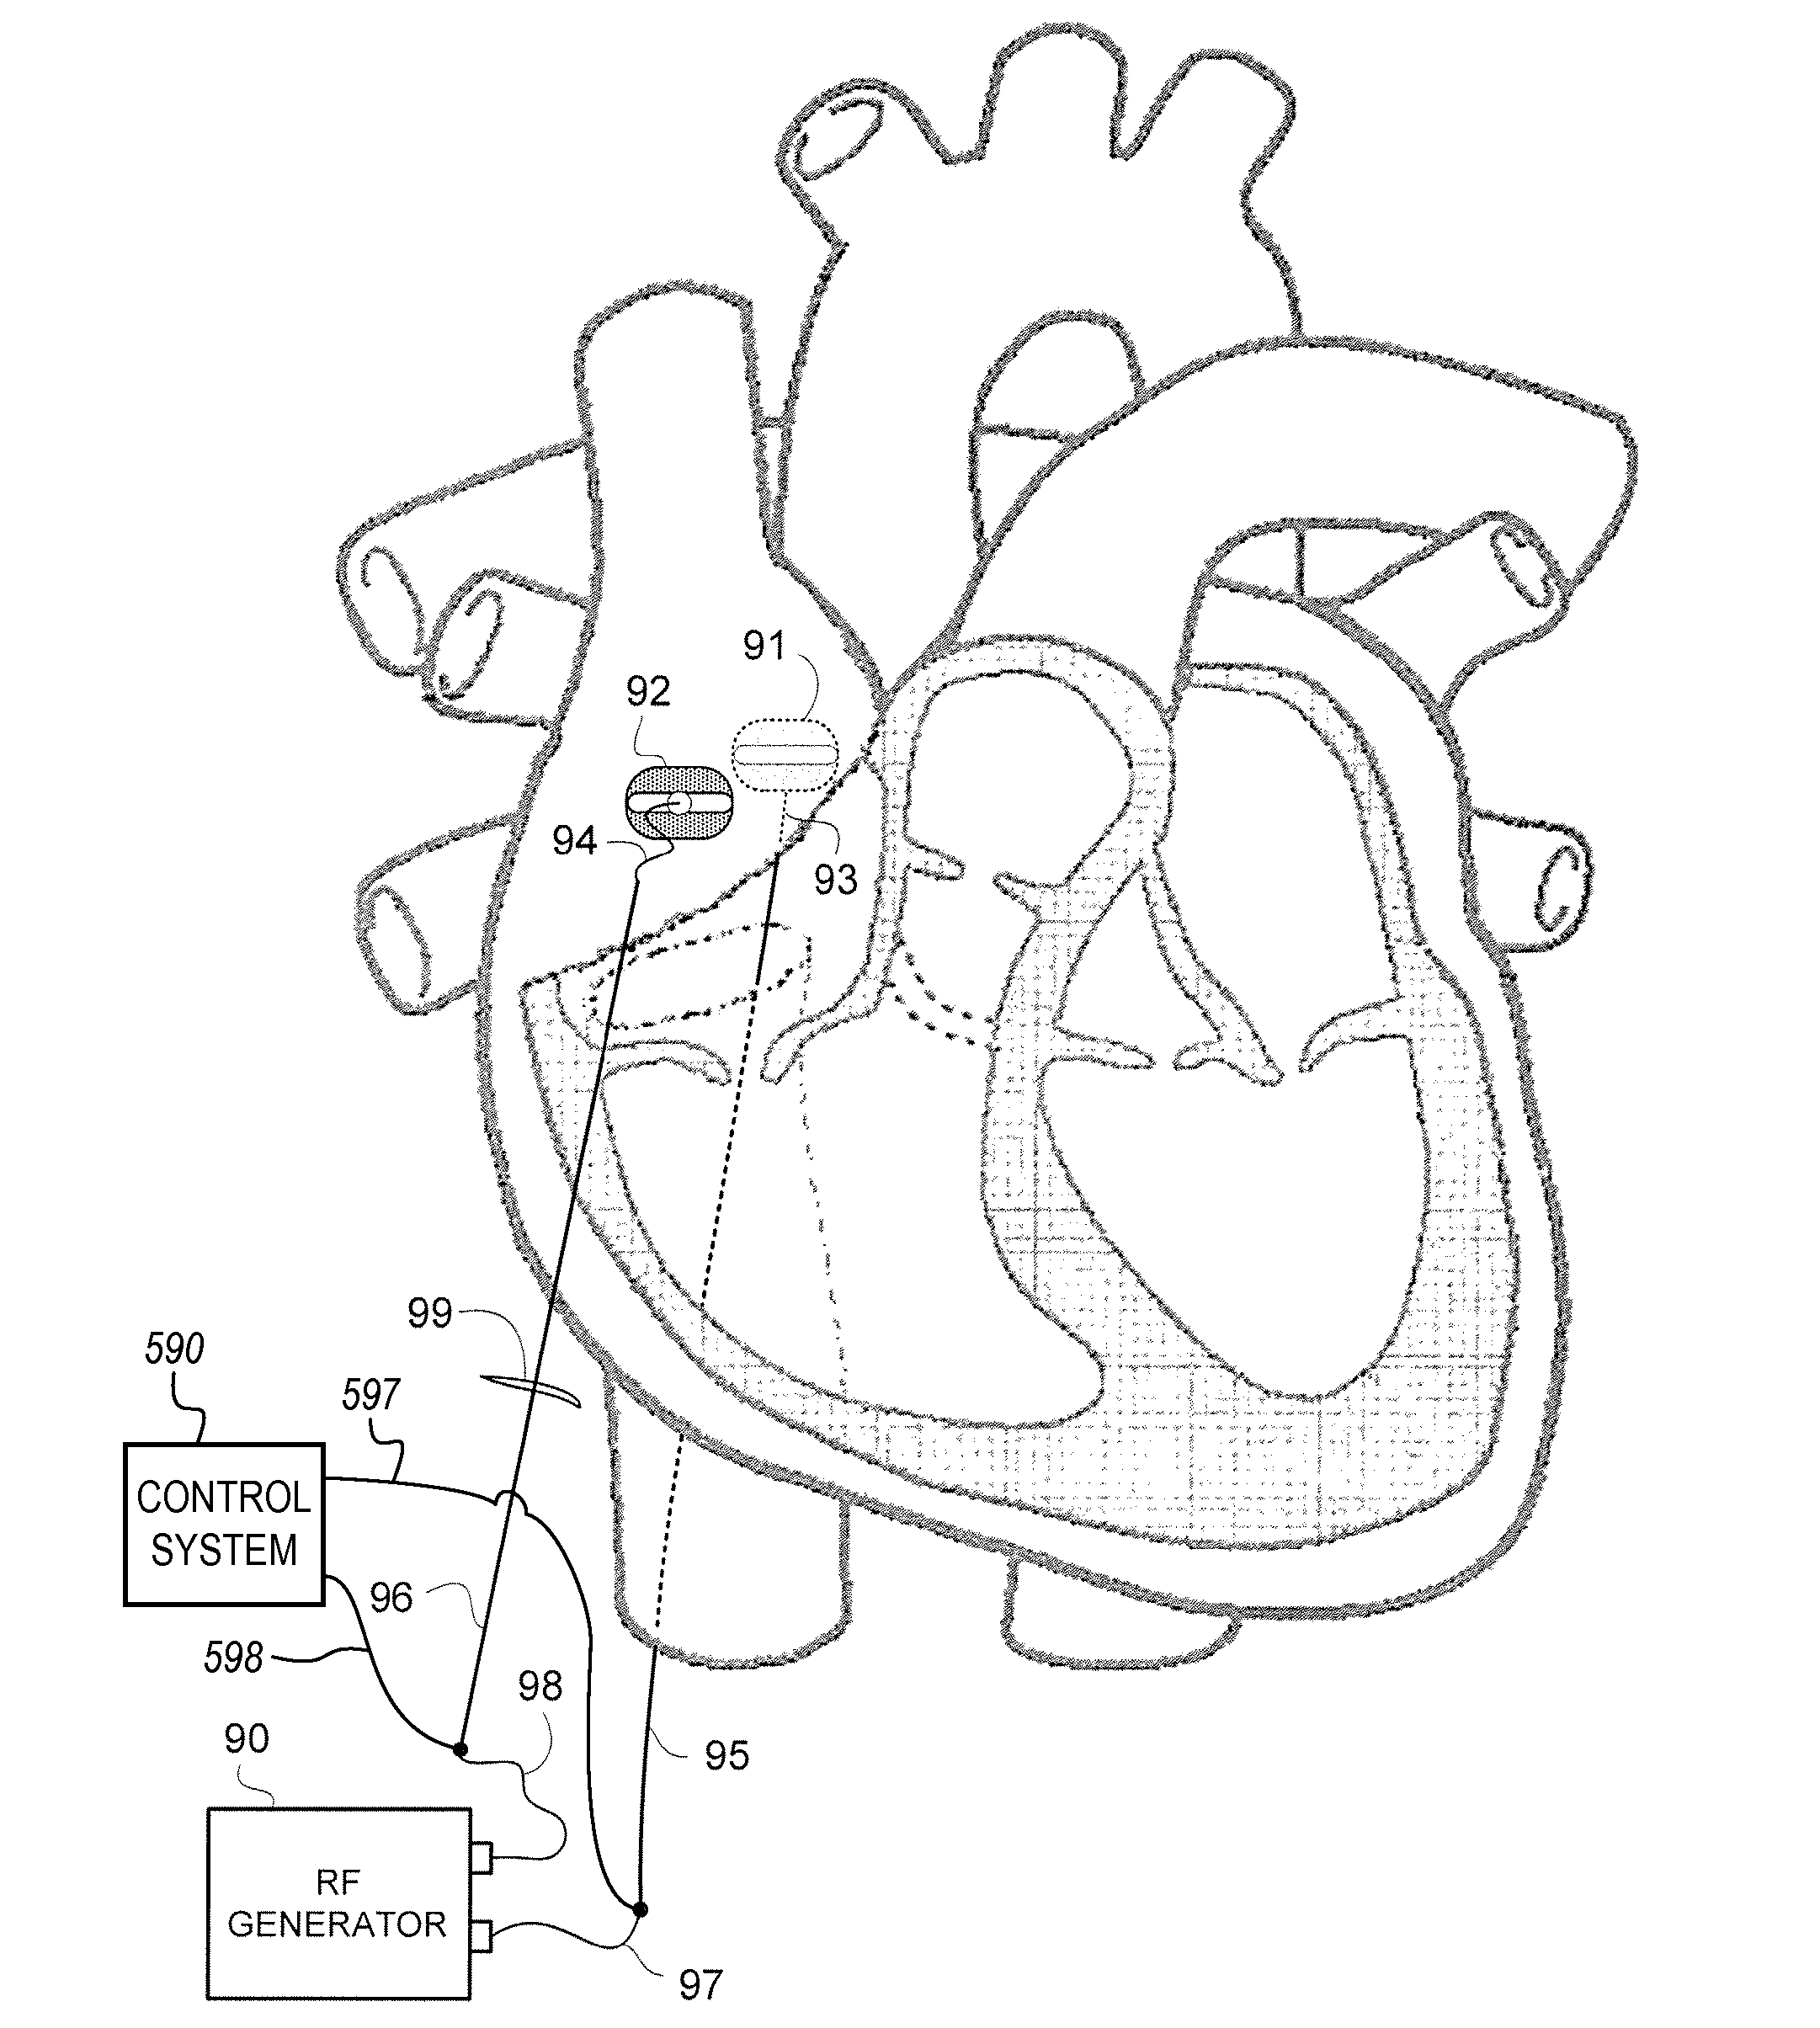 Magnetically coupling devices for mapping and/or ablating